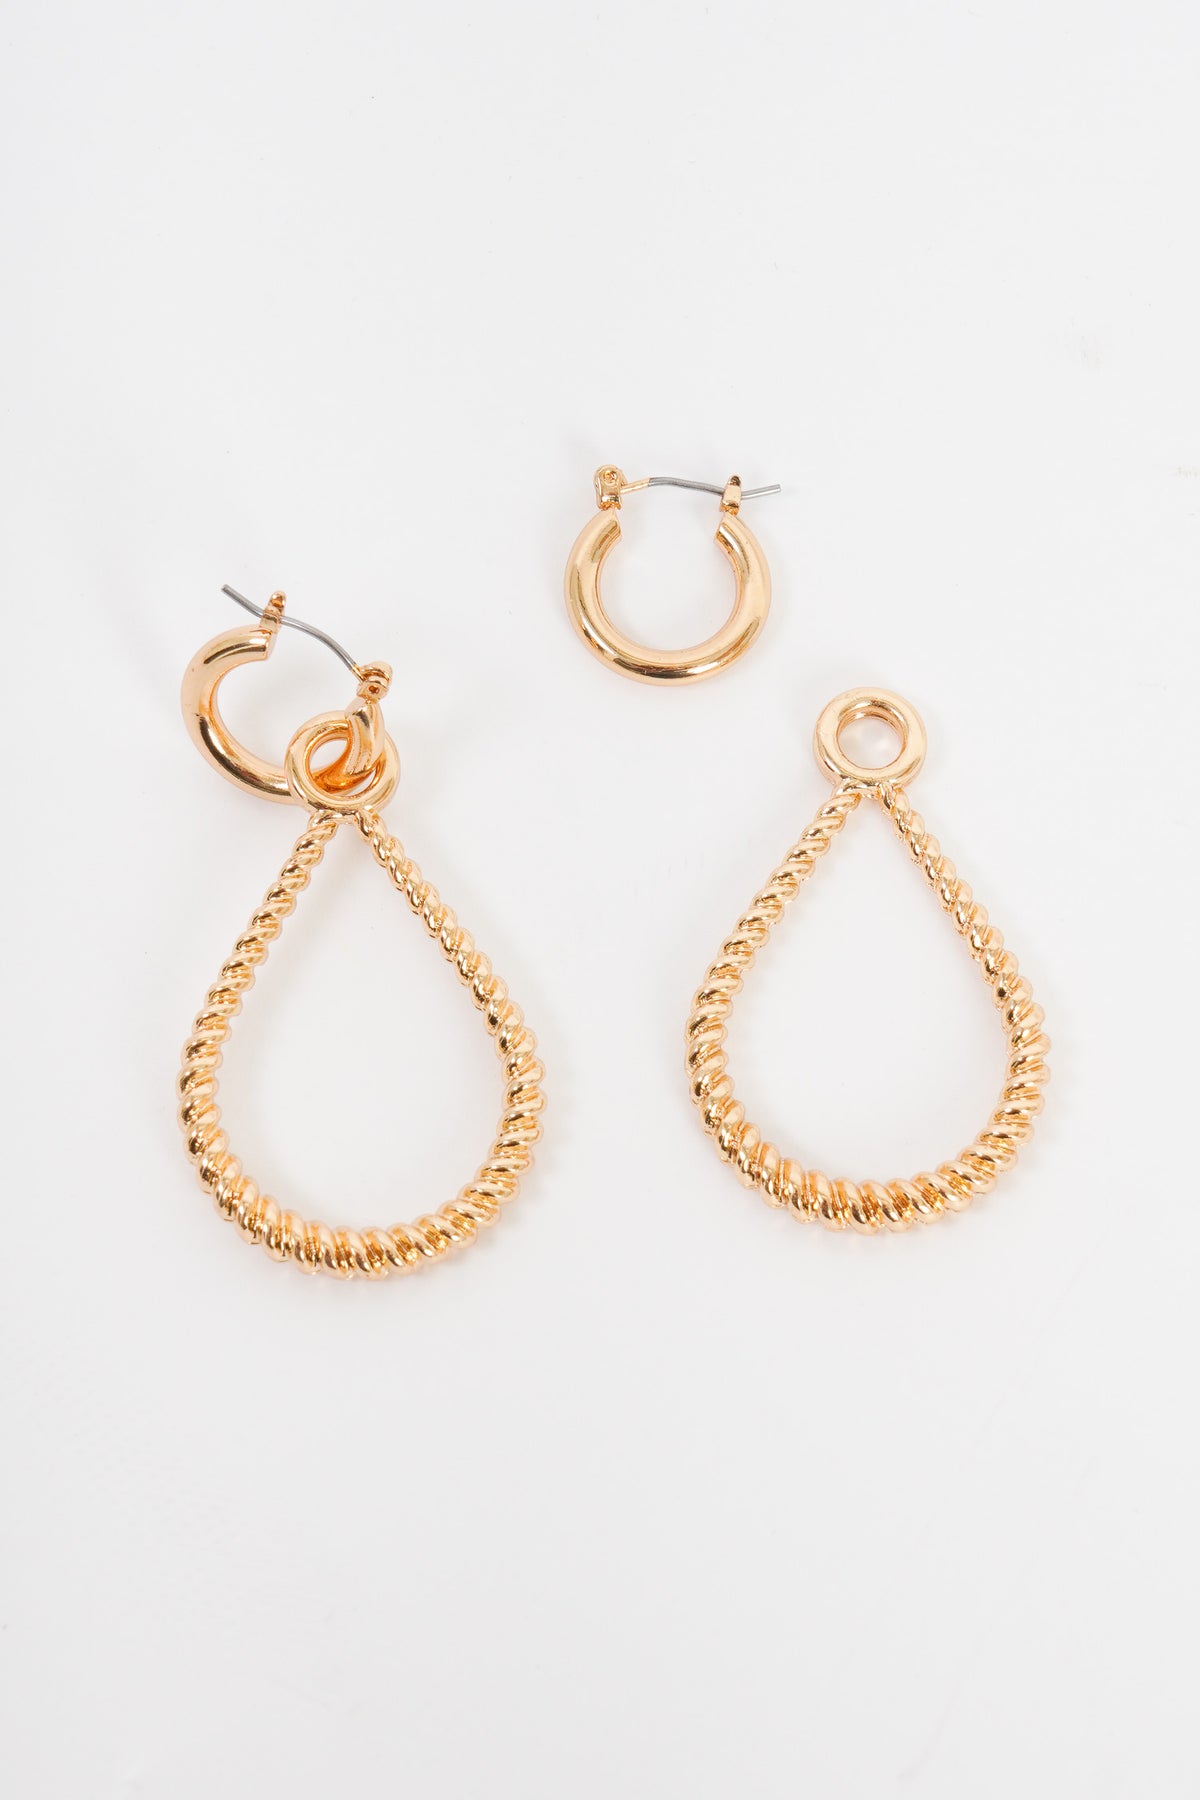 A pair of earrings that feature a unique two in one deal. The earrings are made up of a small gold hoop that has a small clasp for the closure. On the small hoop is a twisted teardrop earring that can be worn with the small hoop, or you can wear the small hoop by itself. The teardrop earring has a small circle that allows you to slide it on and off of the small hoop. 